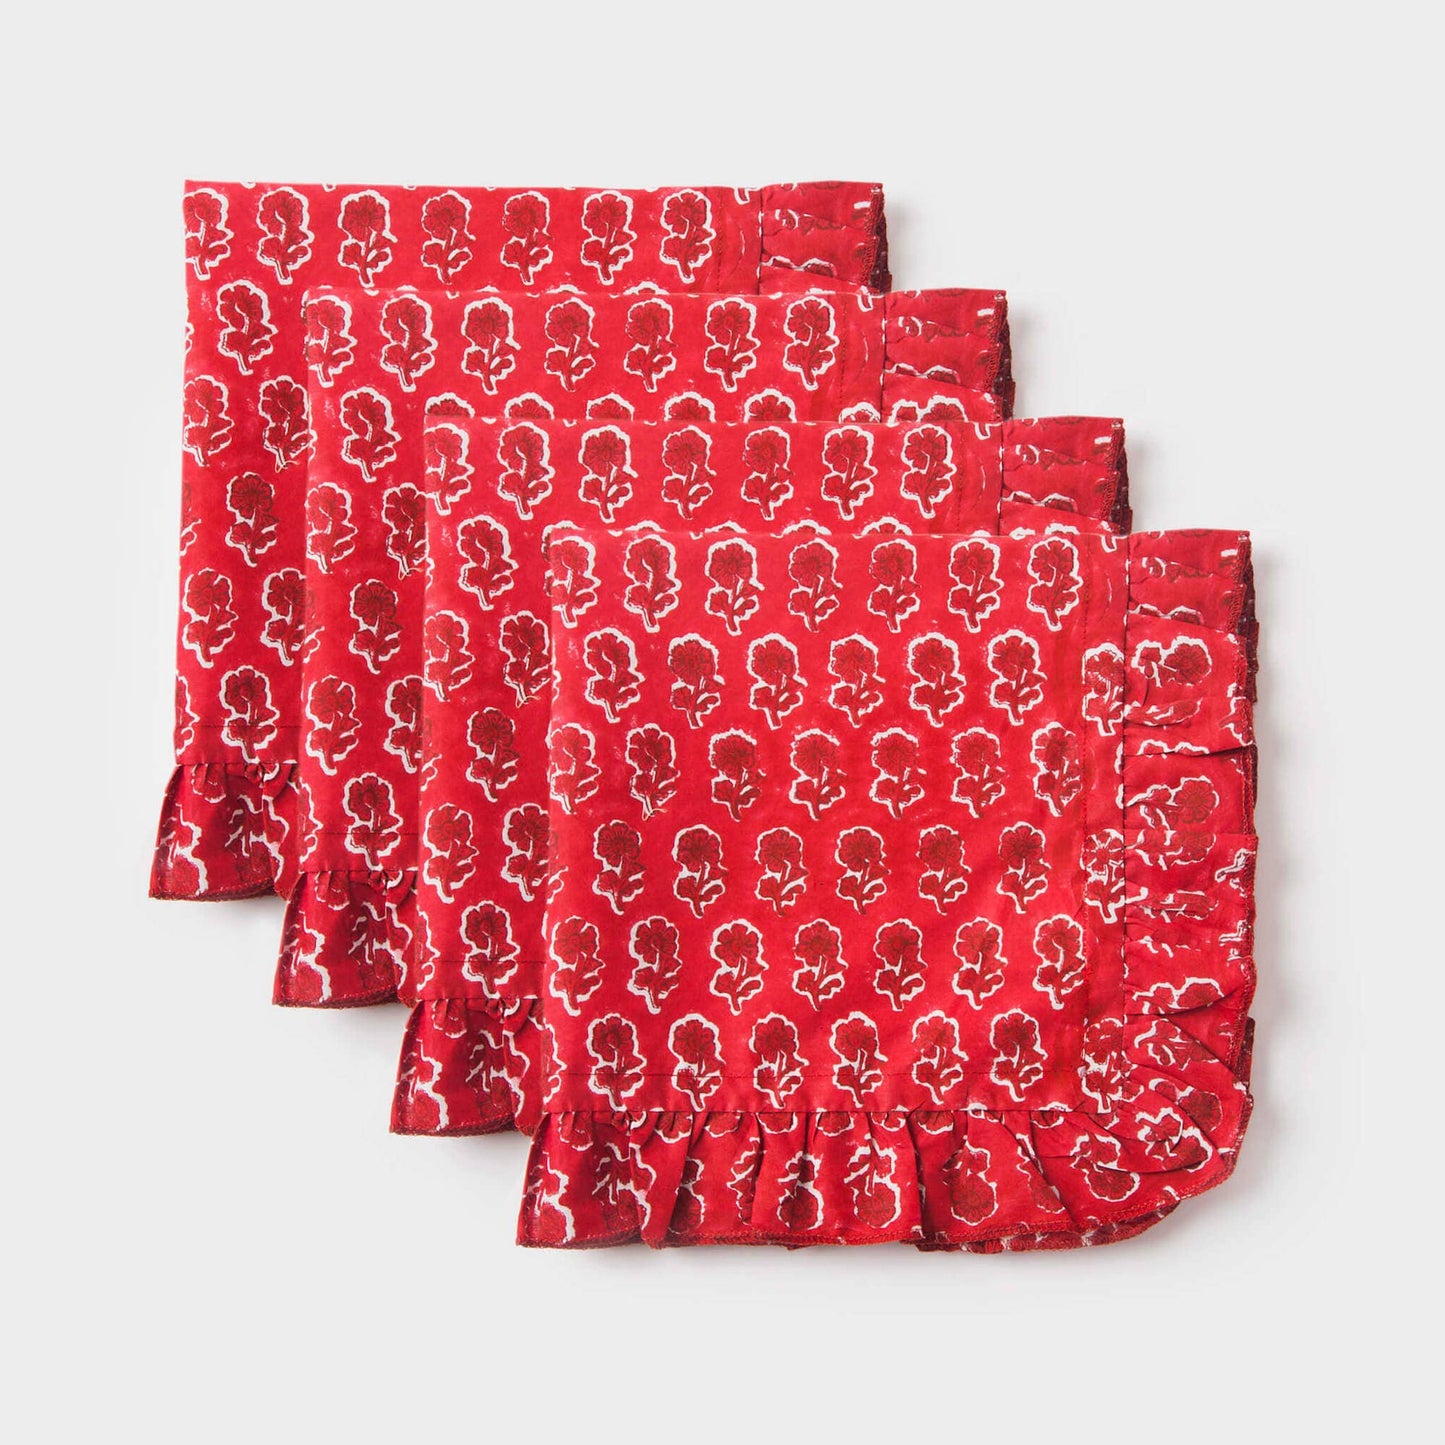 Daisy Patterned Ruffled Napkins - Set of 4 - Curated Home Decor